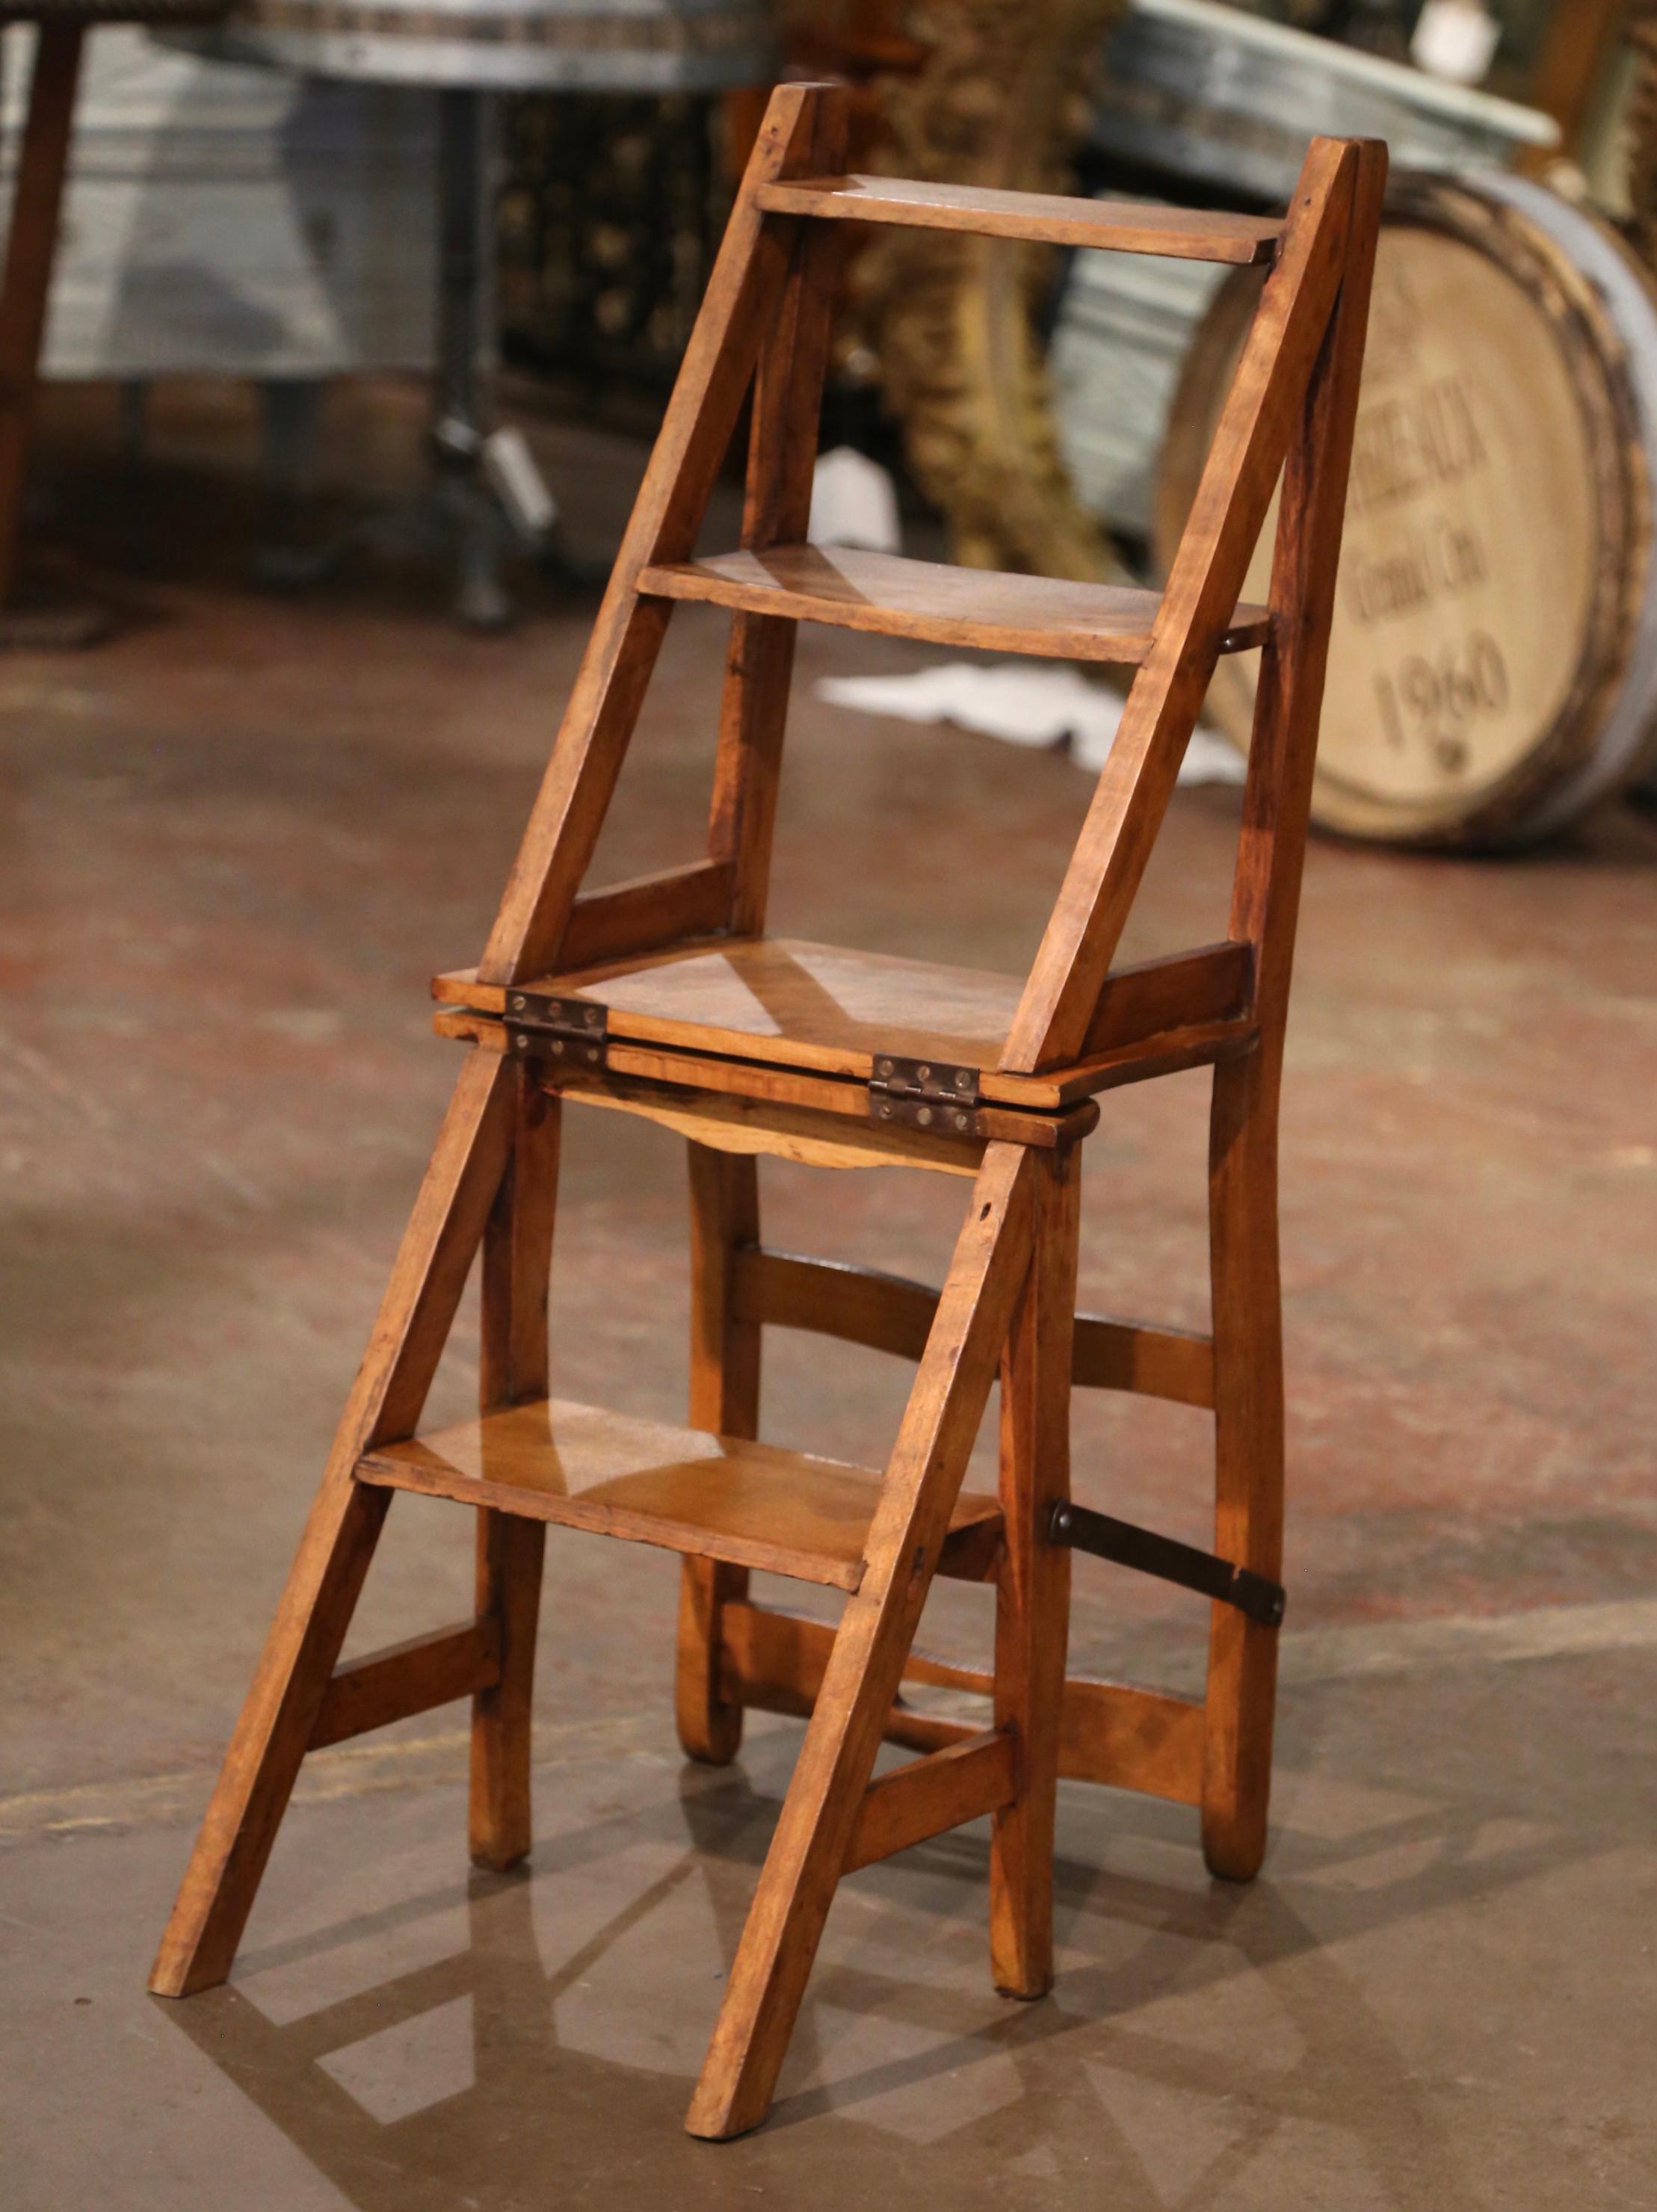 19th Century French Carved Beech Wood Chair Folding Step Ladder In Excellent Condition For Sale In Dallas, TX